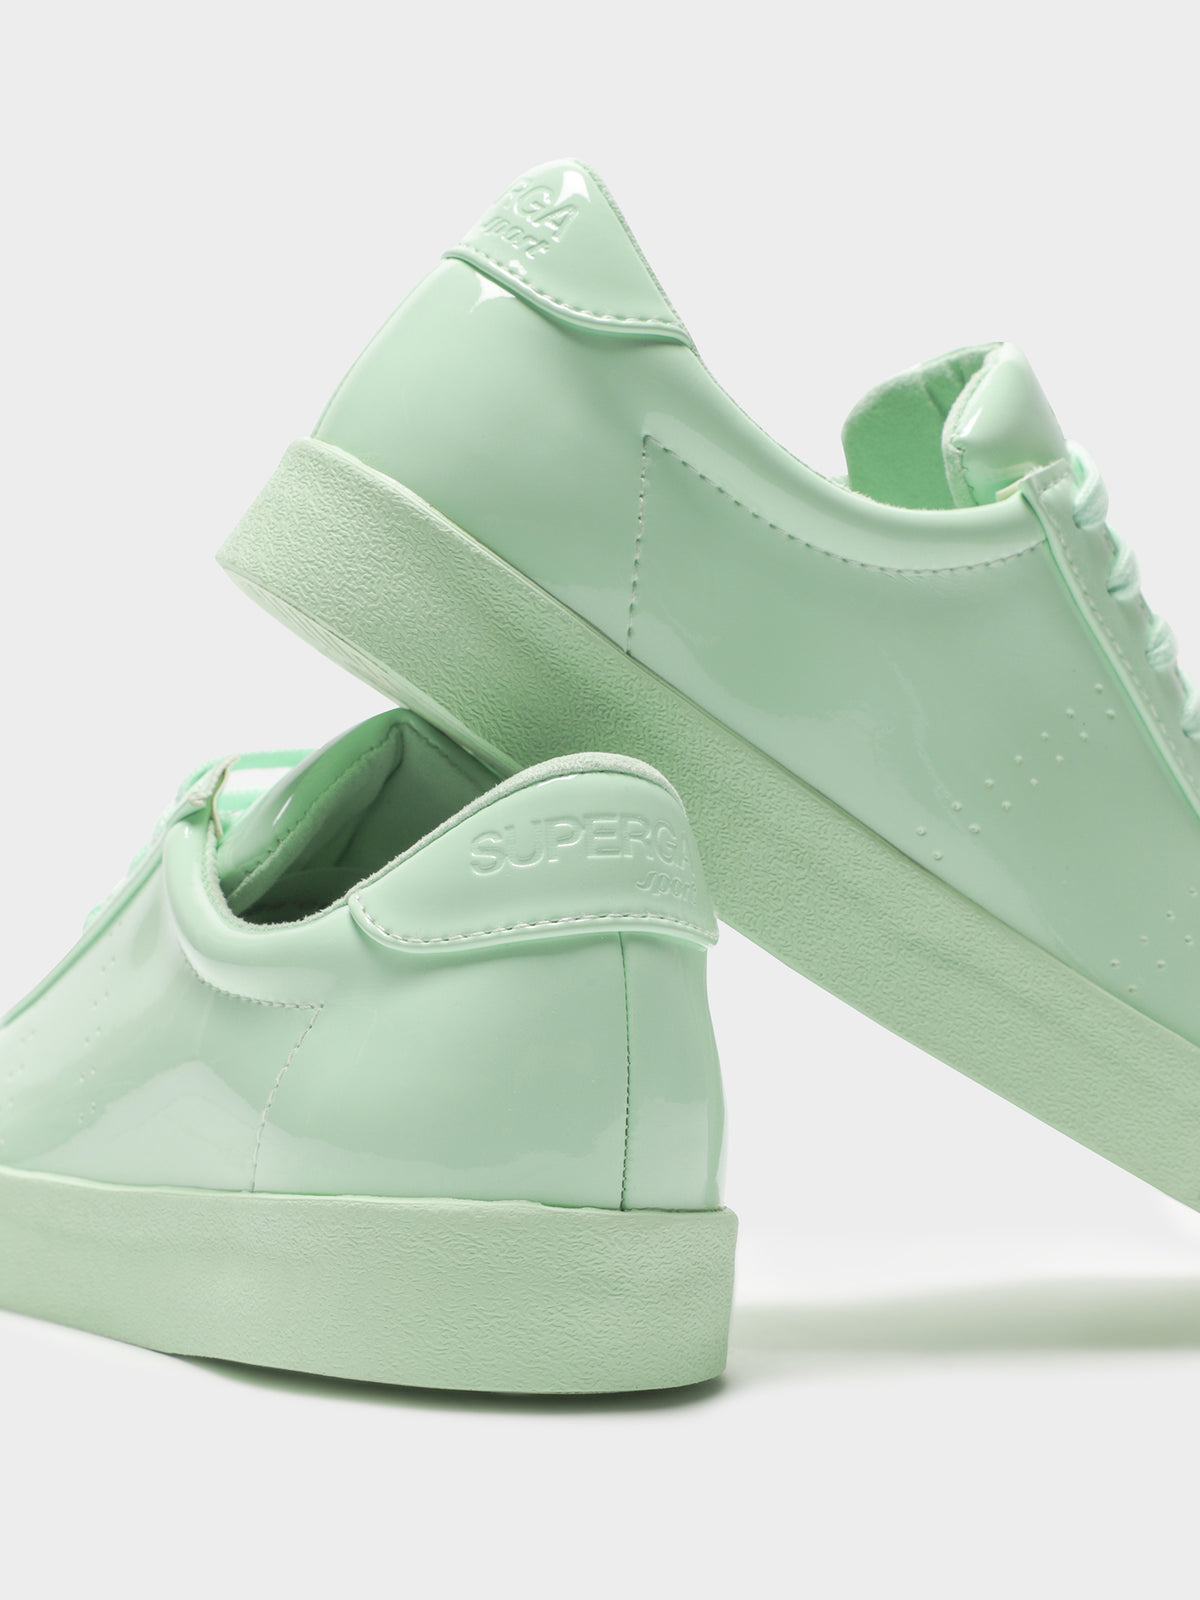 Womens 2843 Clubs Syneaw Pastel Sneakers in Mint Green